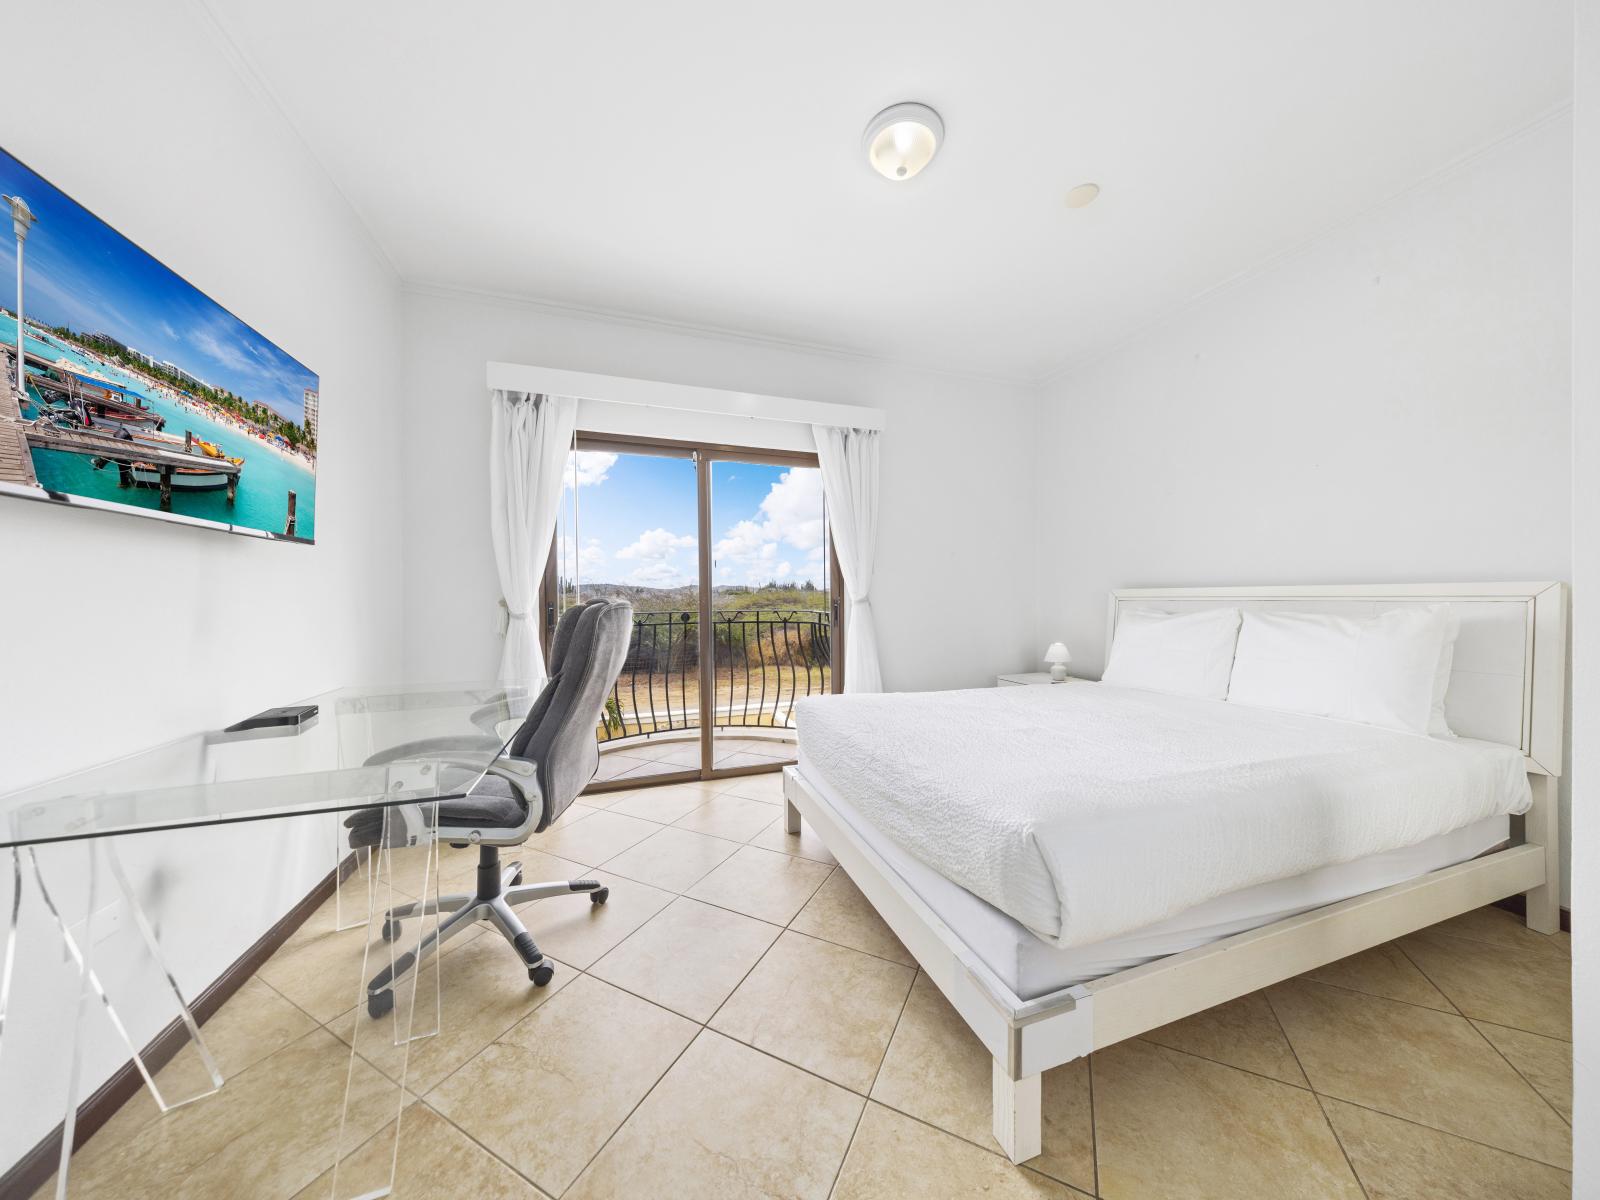 Bedroom 1 features a queen size bed access to the private balcony with glass sliding doors